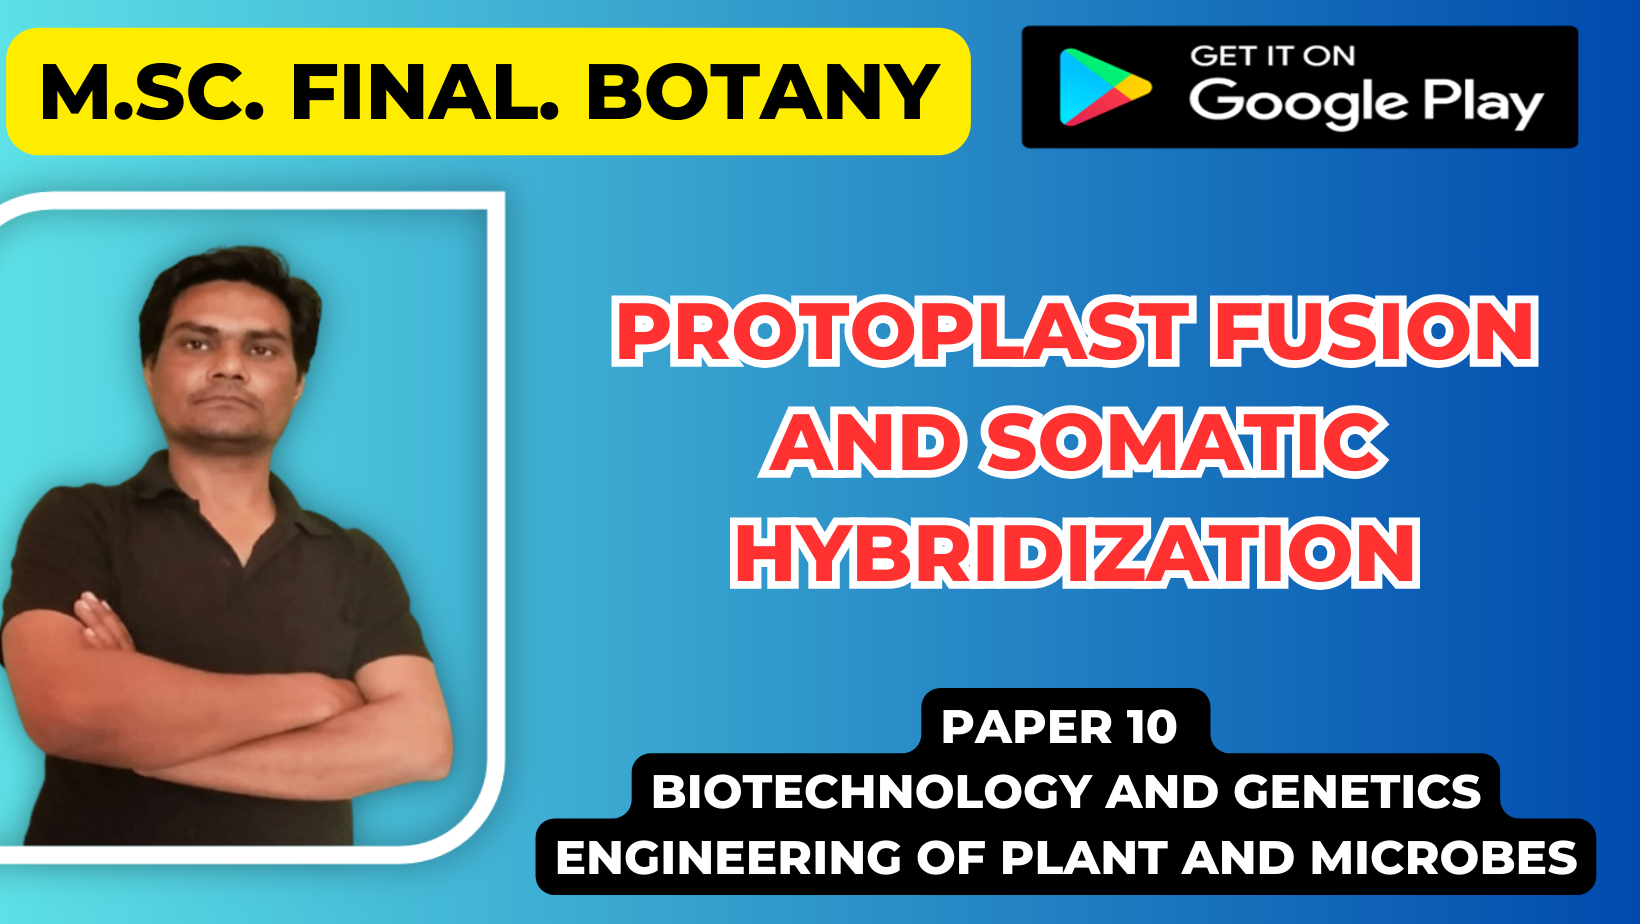 You are currently viewing Protoplast Fusion and Somatic Hybridization